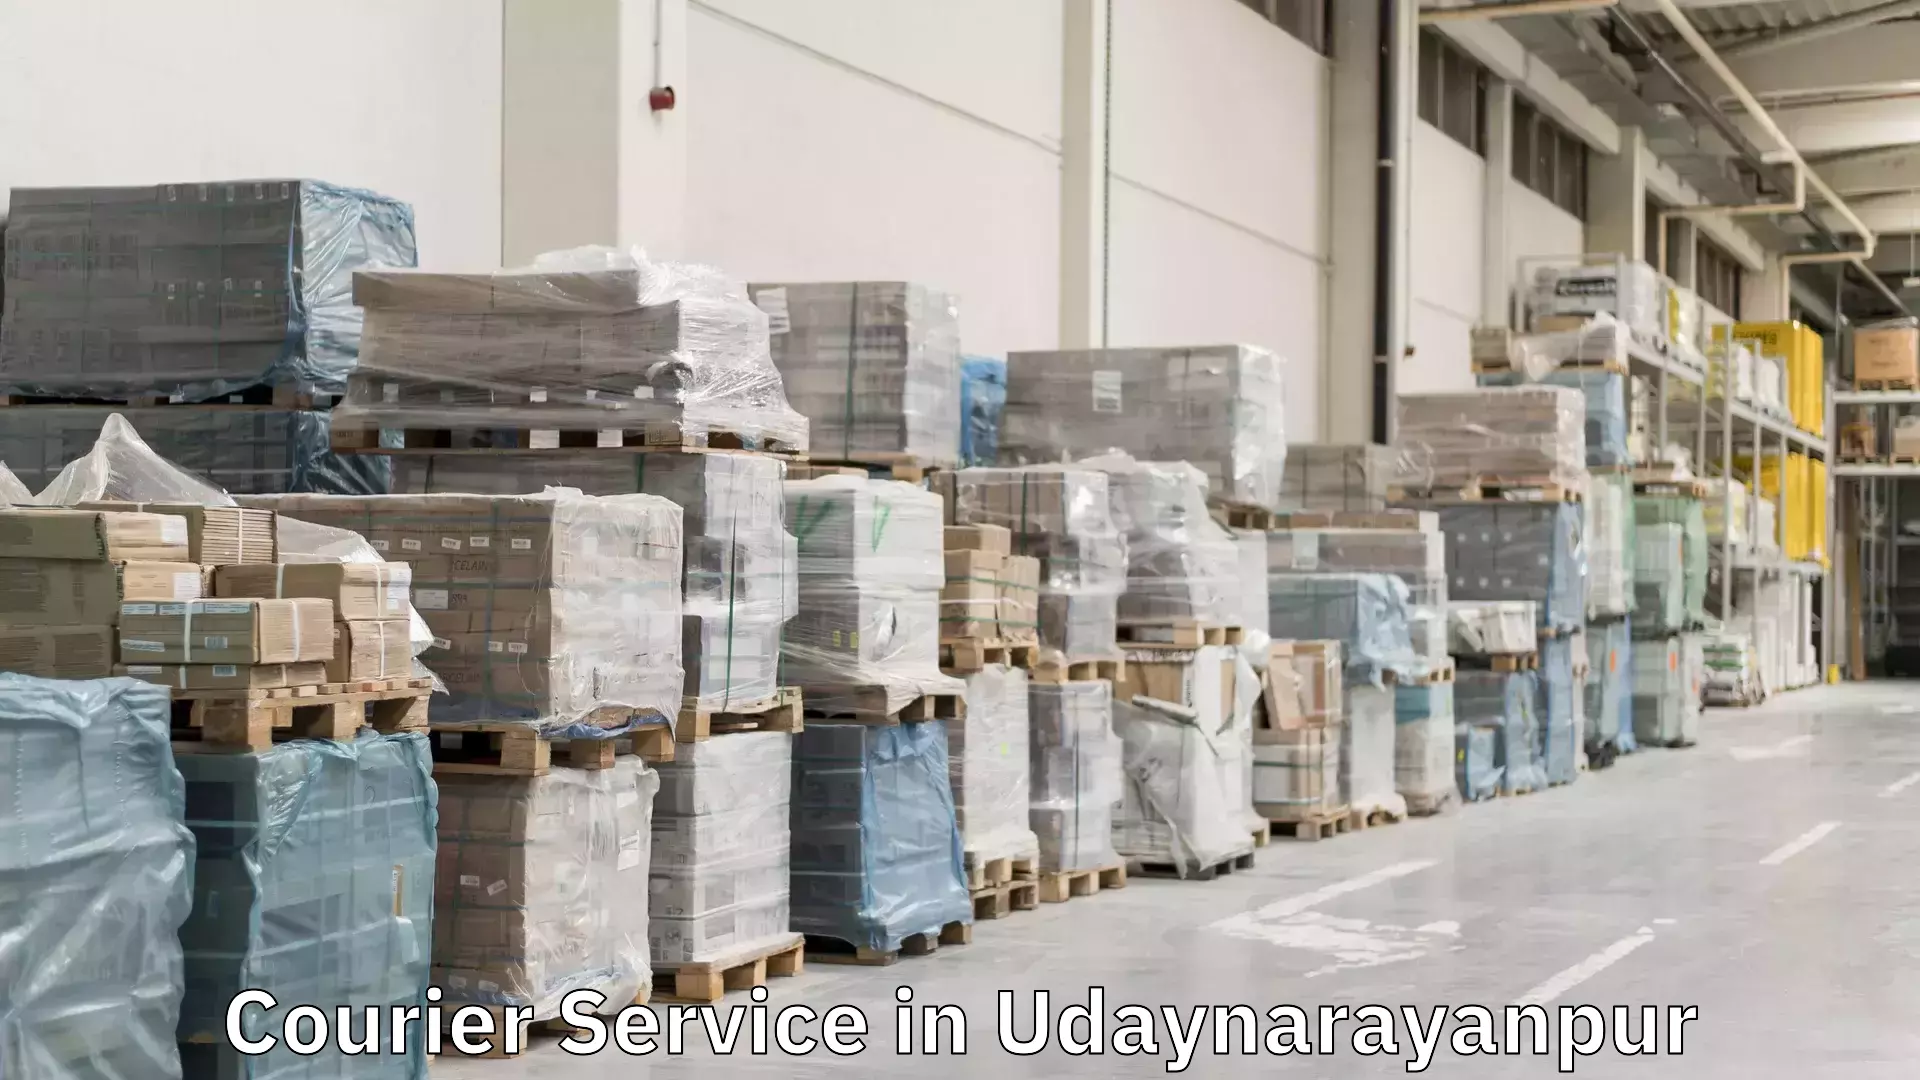 Courier rate comparison in Udaynarayanpur